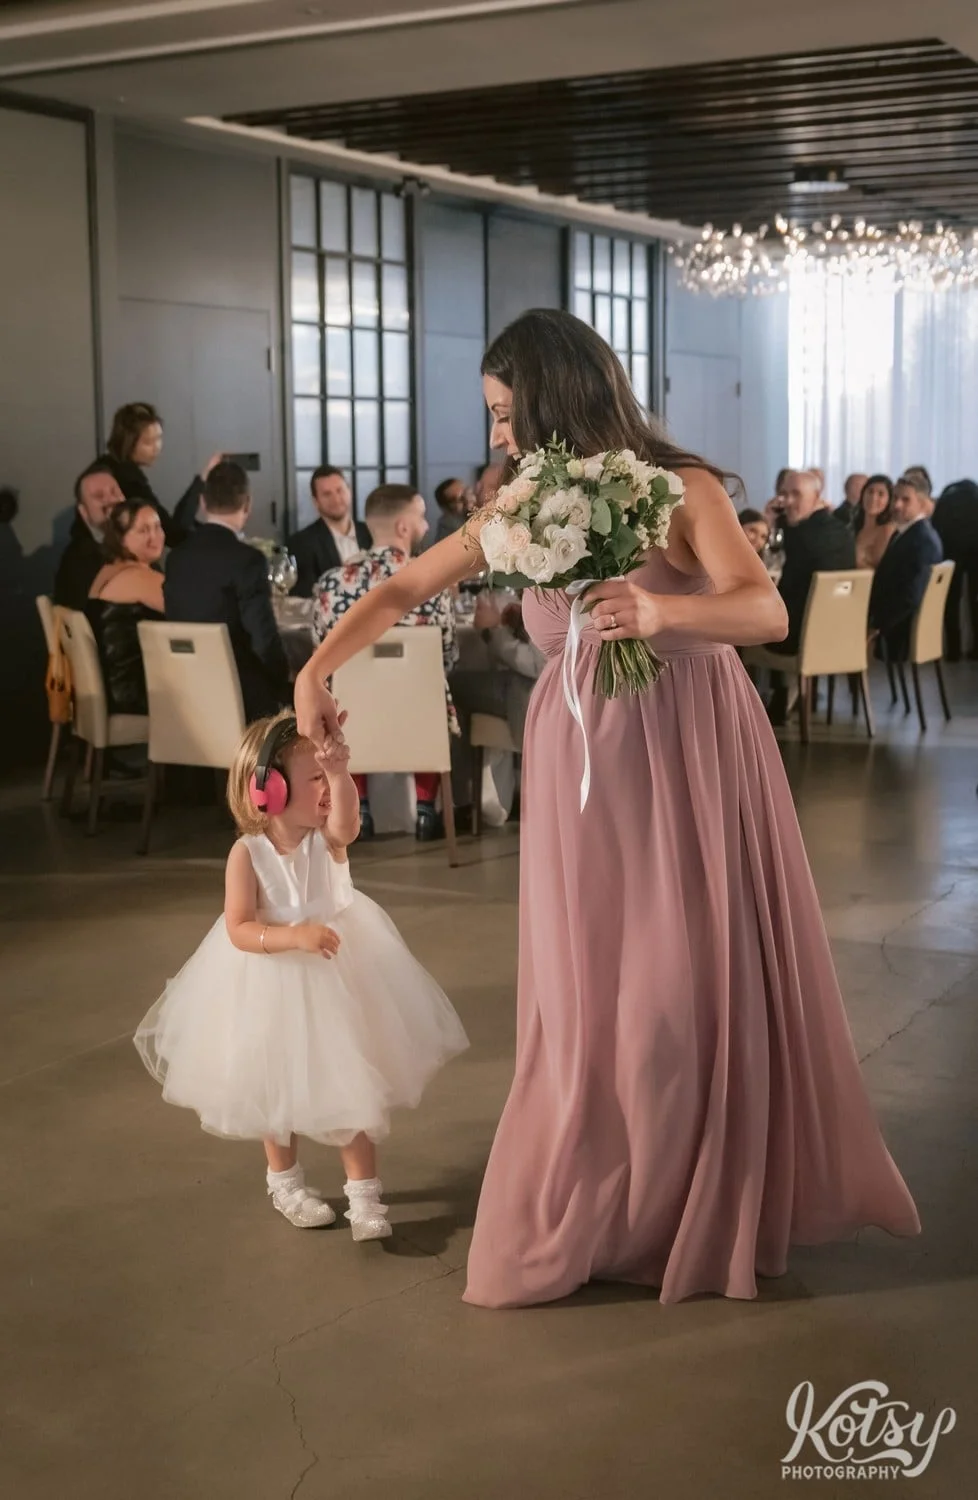 A woman in a pink dress spins the flower girl as they make their entrance during a Village Loft wedding reception in Toronto, Canada